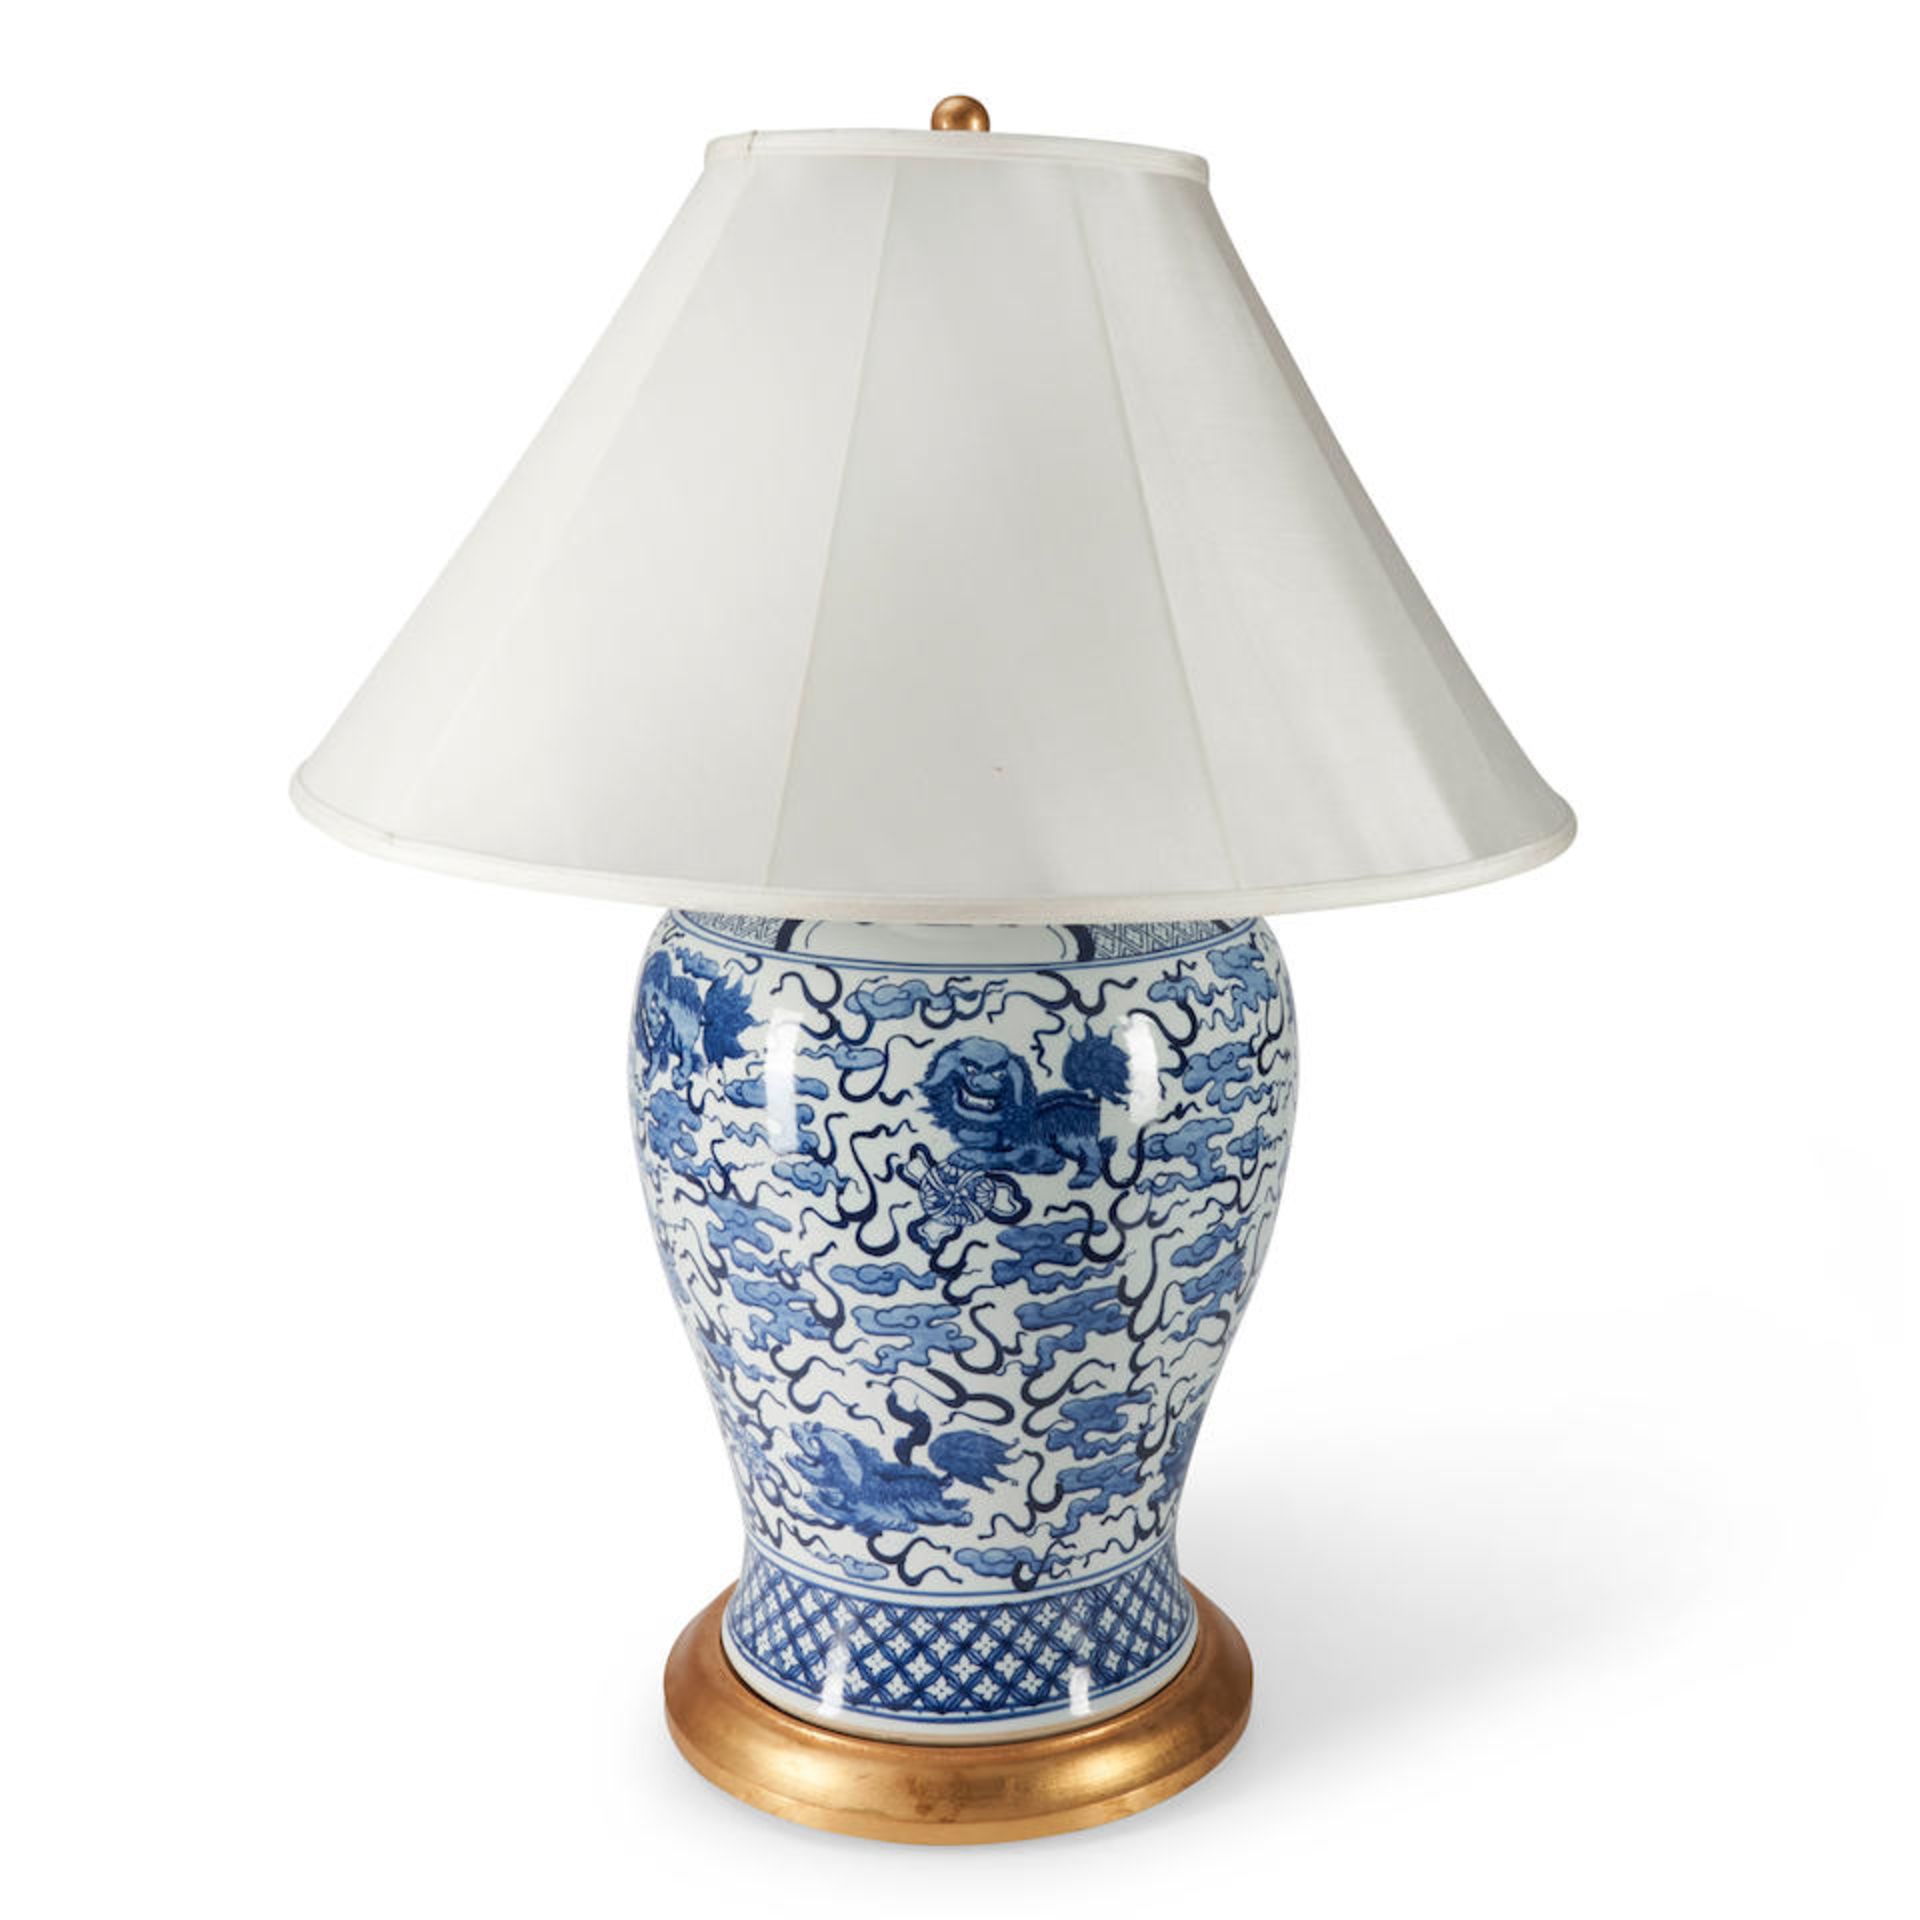 Blue and White Baluster Jar Mounted as Lamp, China, 20th/21st century.